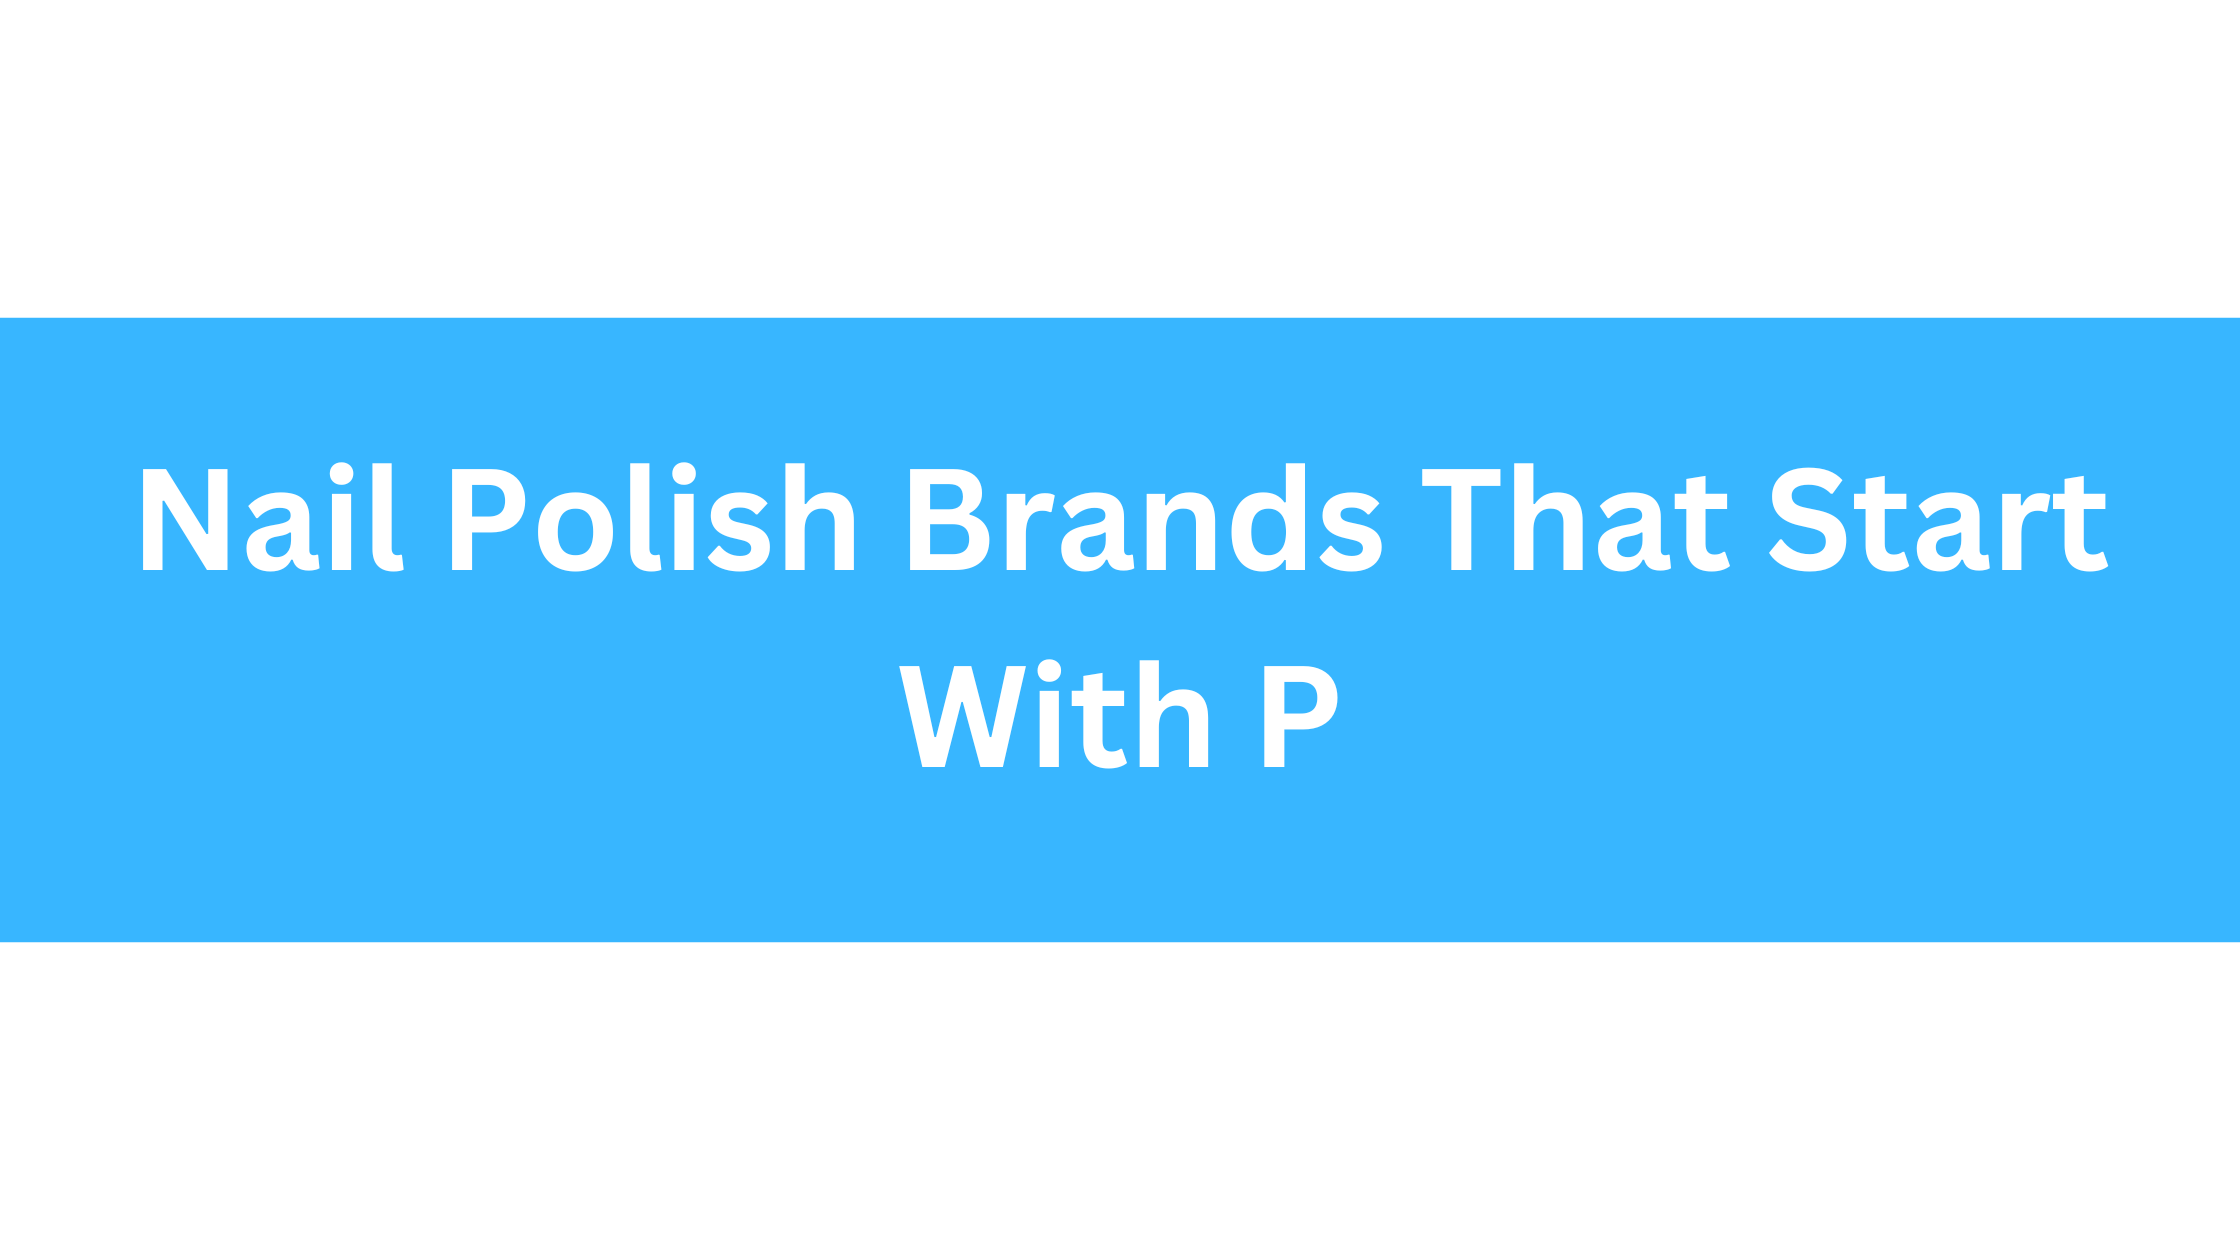 Nail Polish Brands That Start With P